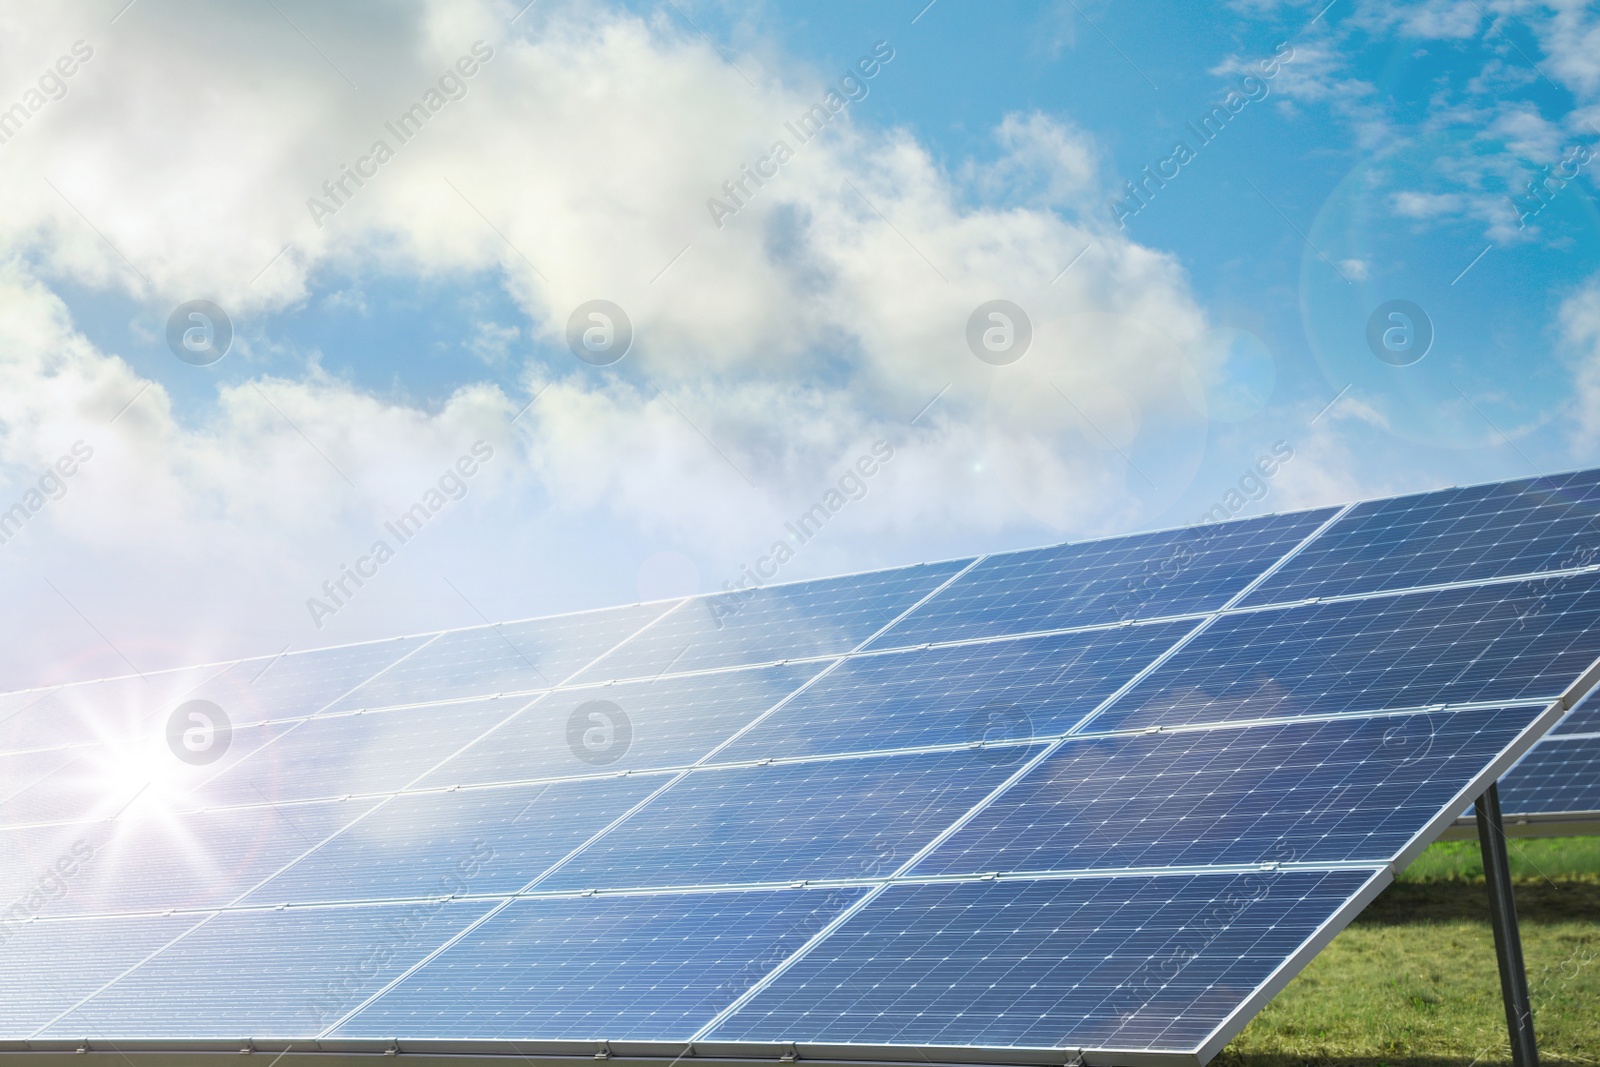 Image of Solar panels outdoors on sunny day. Alternative energy source